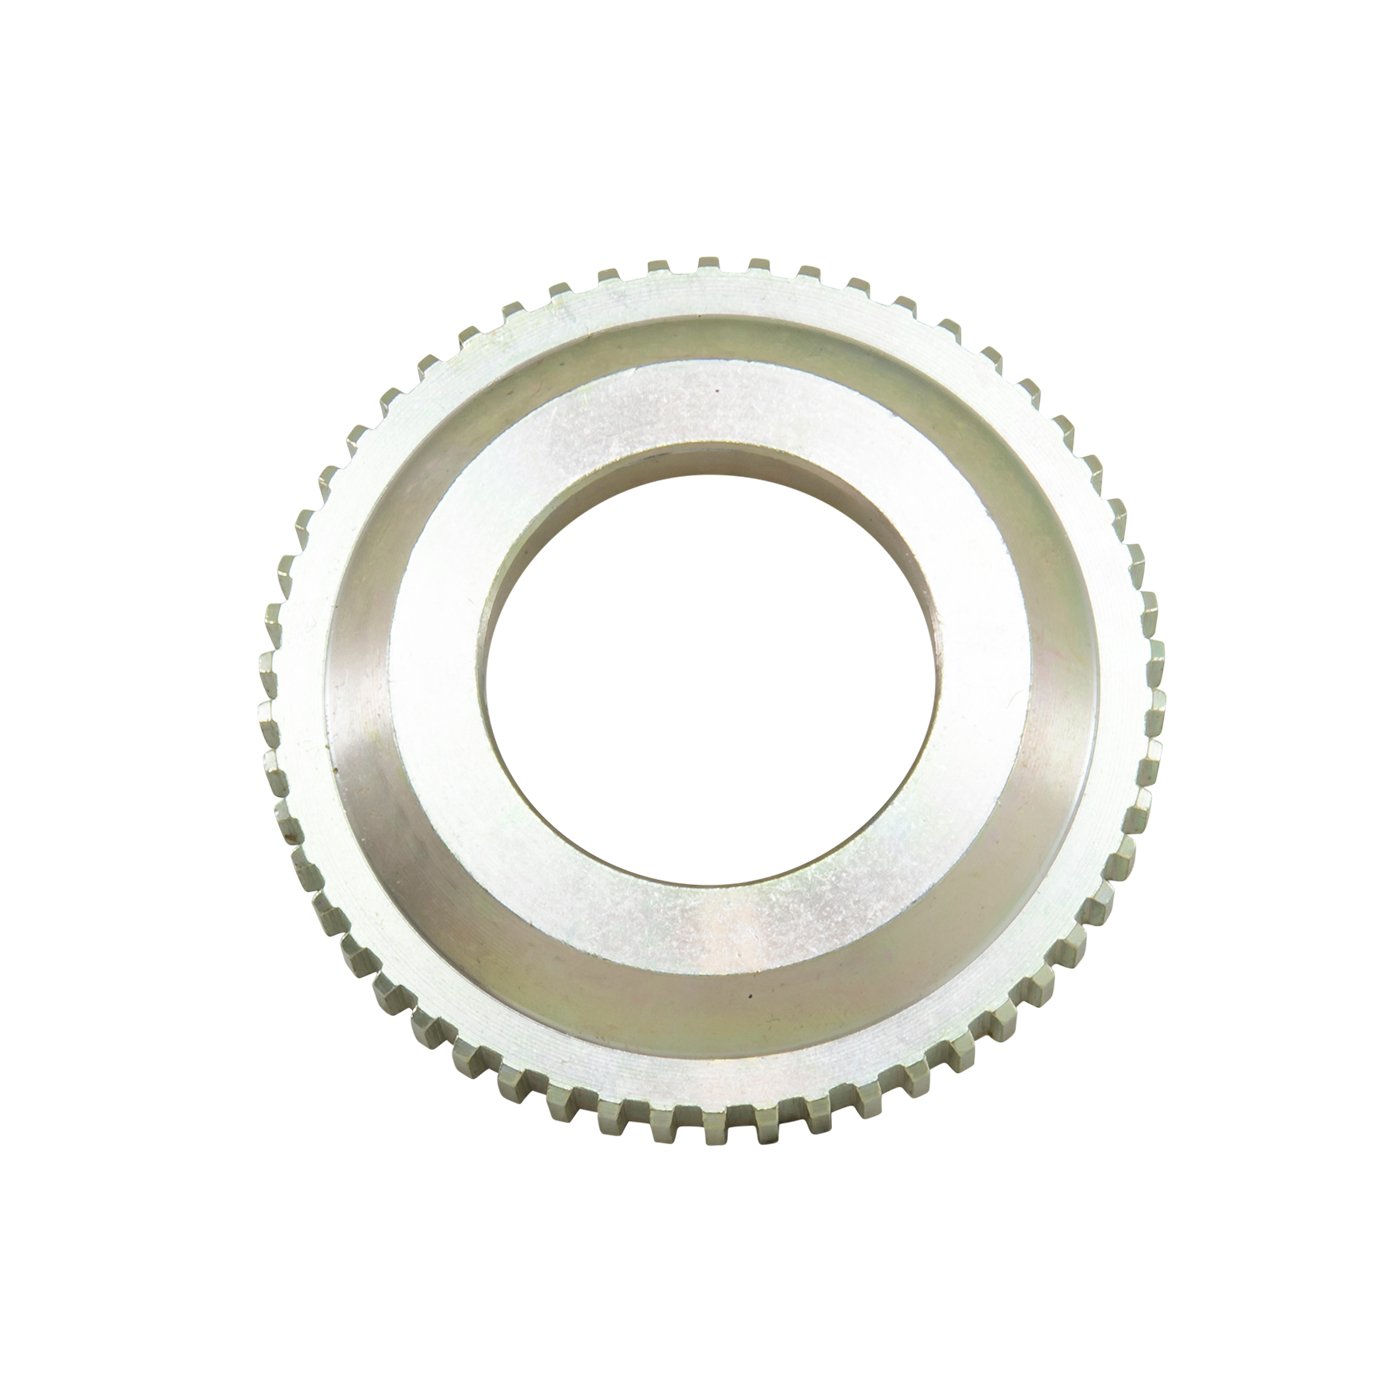 mmodel 35 Axle Abs Ring Only 3.5 in., 54 Tooth